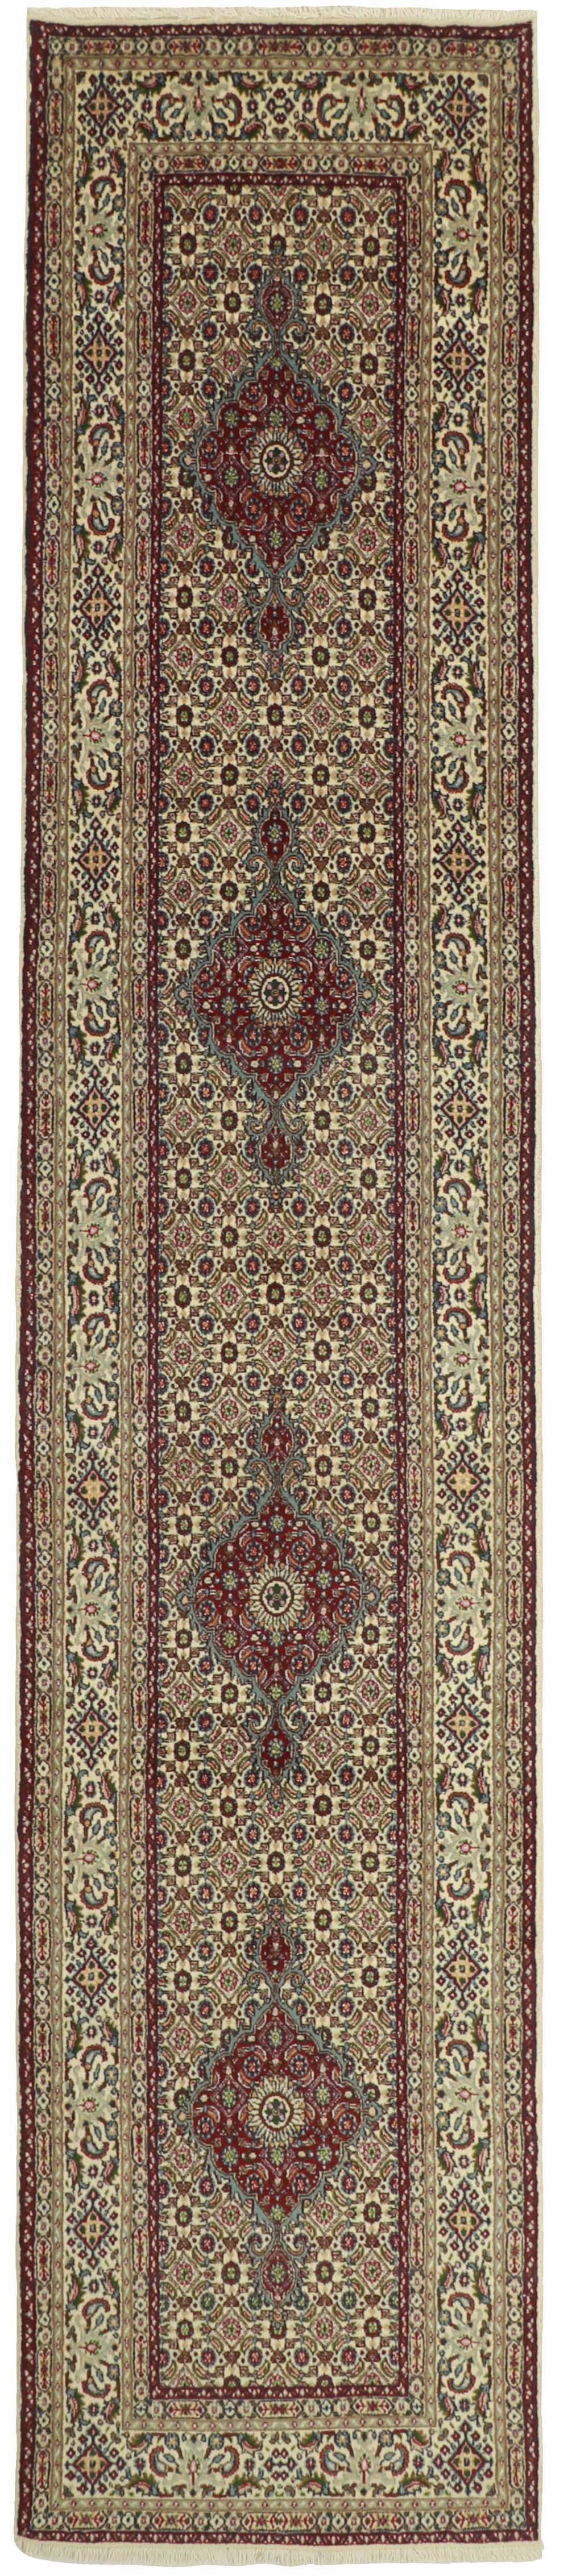 authentic persian runner with traditional floral pattern in red, blue and beige